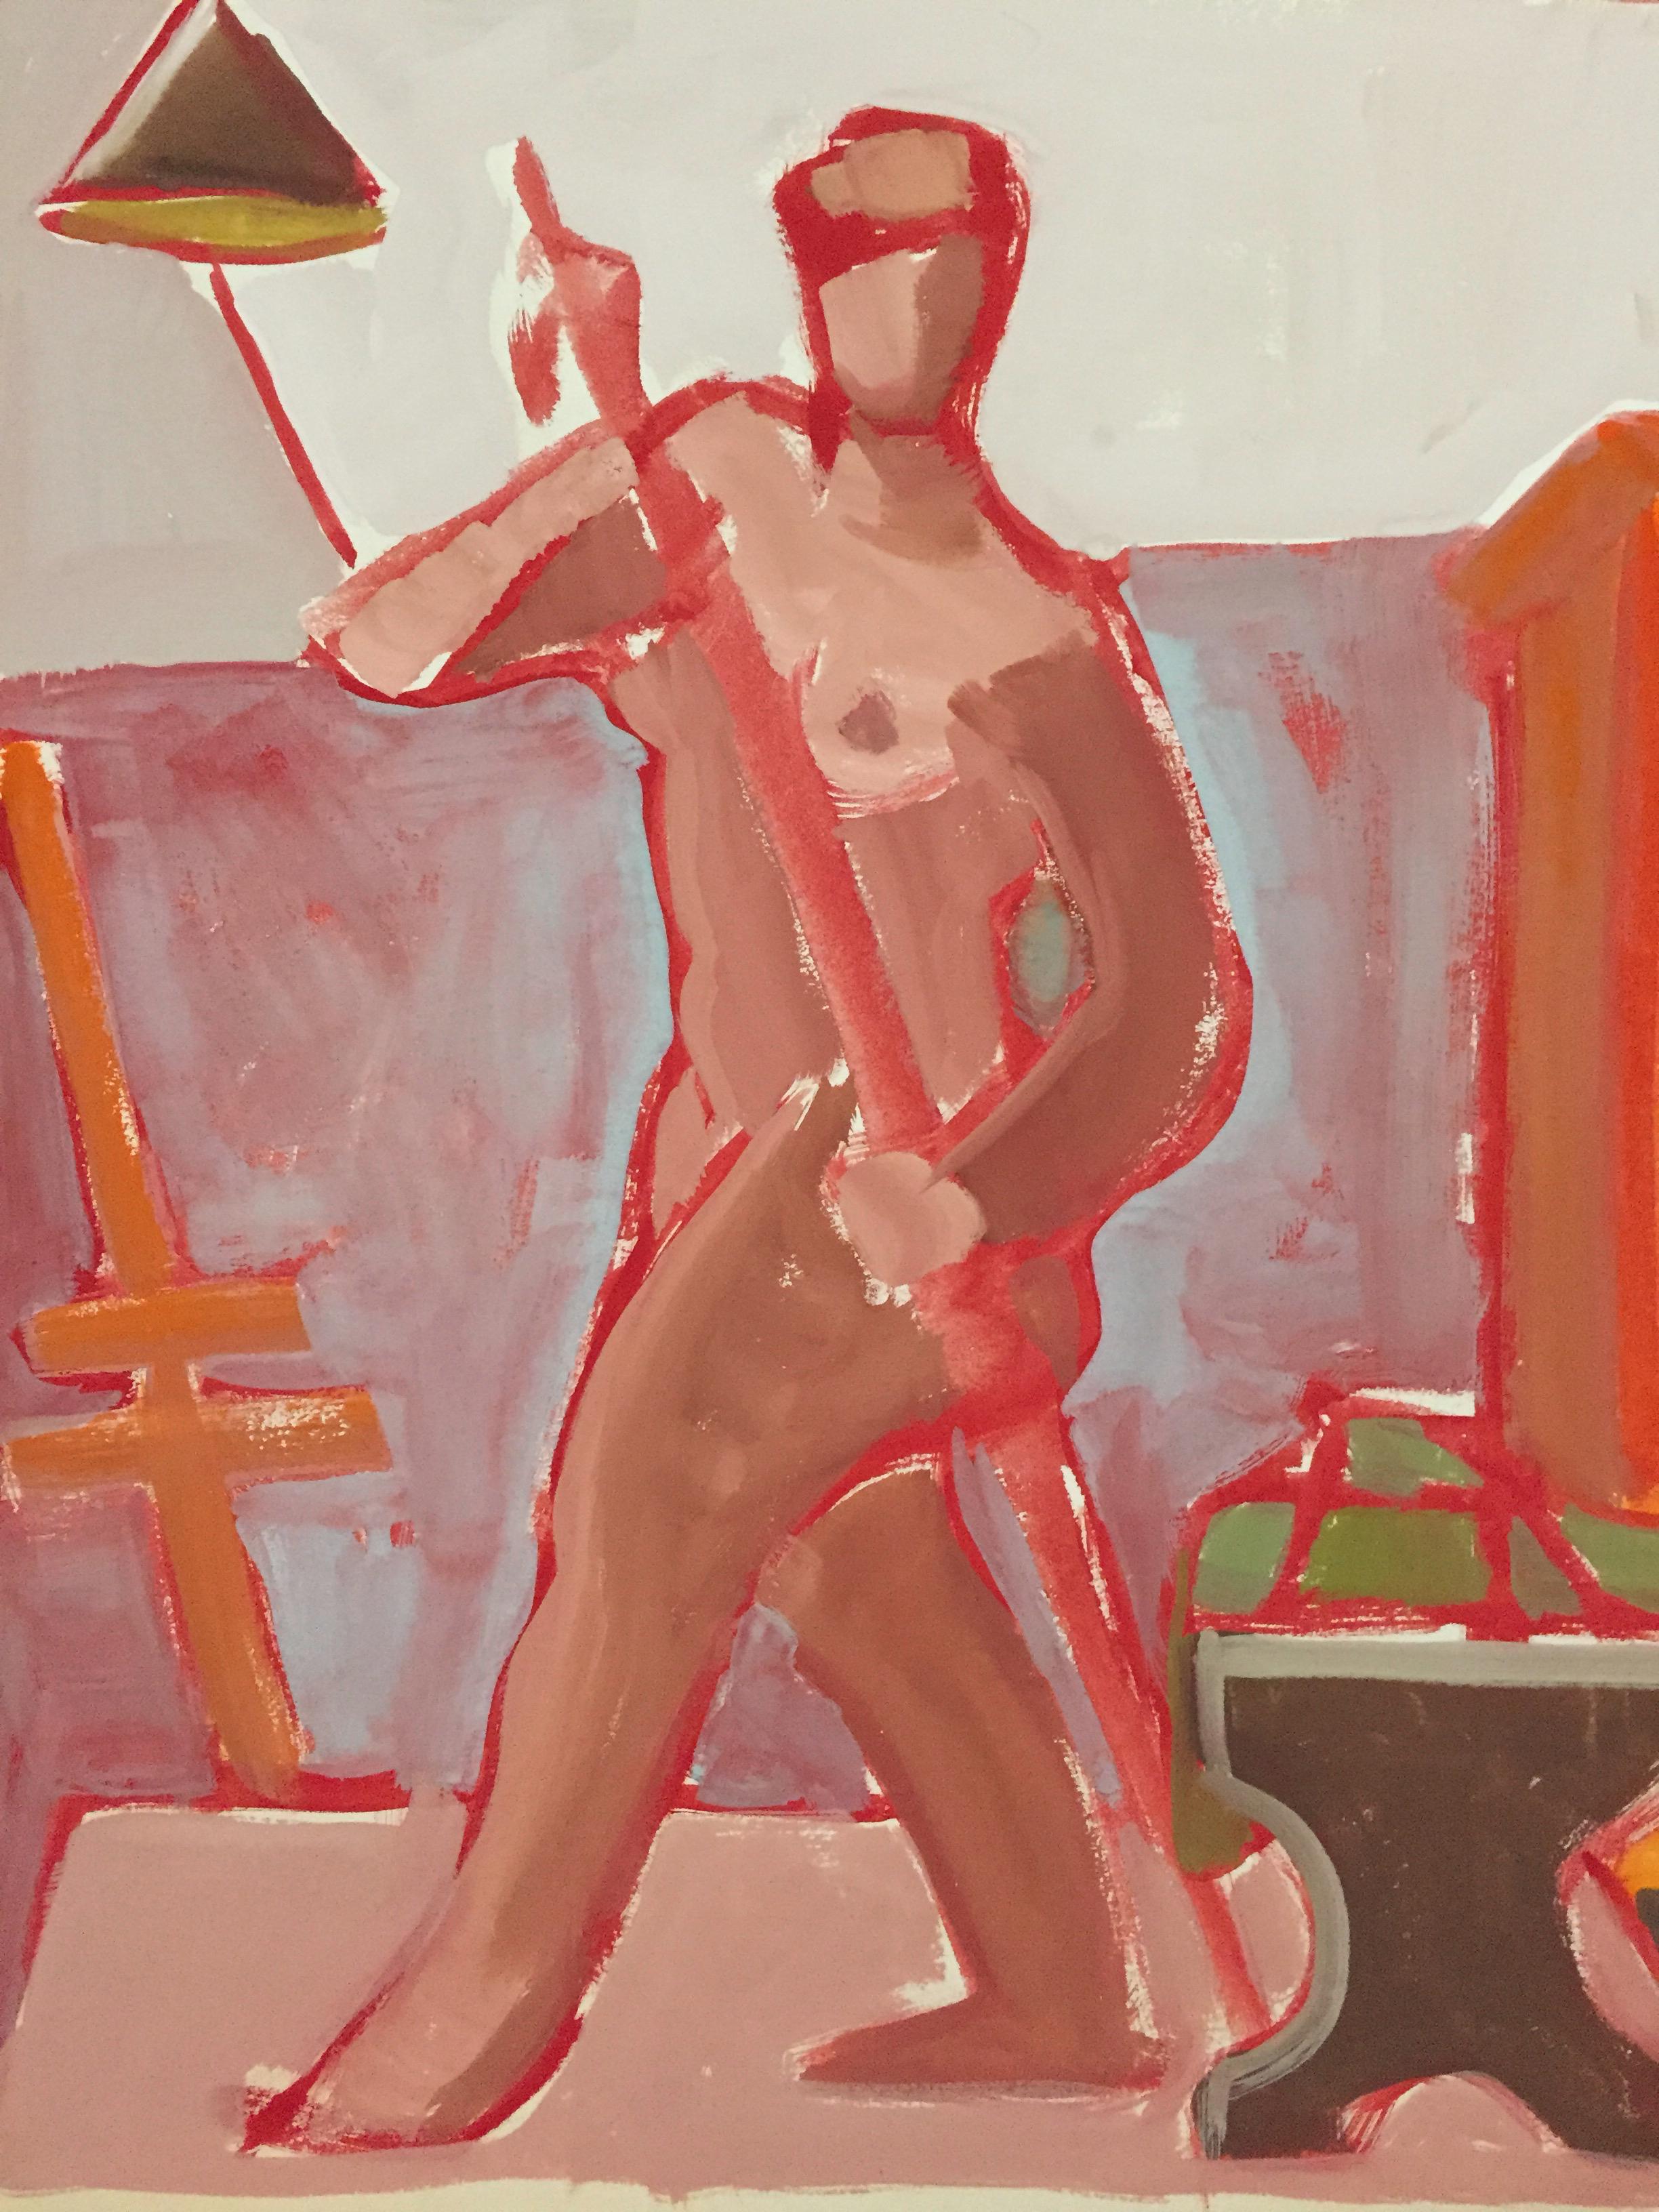 From the estate of Jerry Opper & Ruth Friedman Opper
Orange Nude
c. 1950's
Gouache on Paper
15